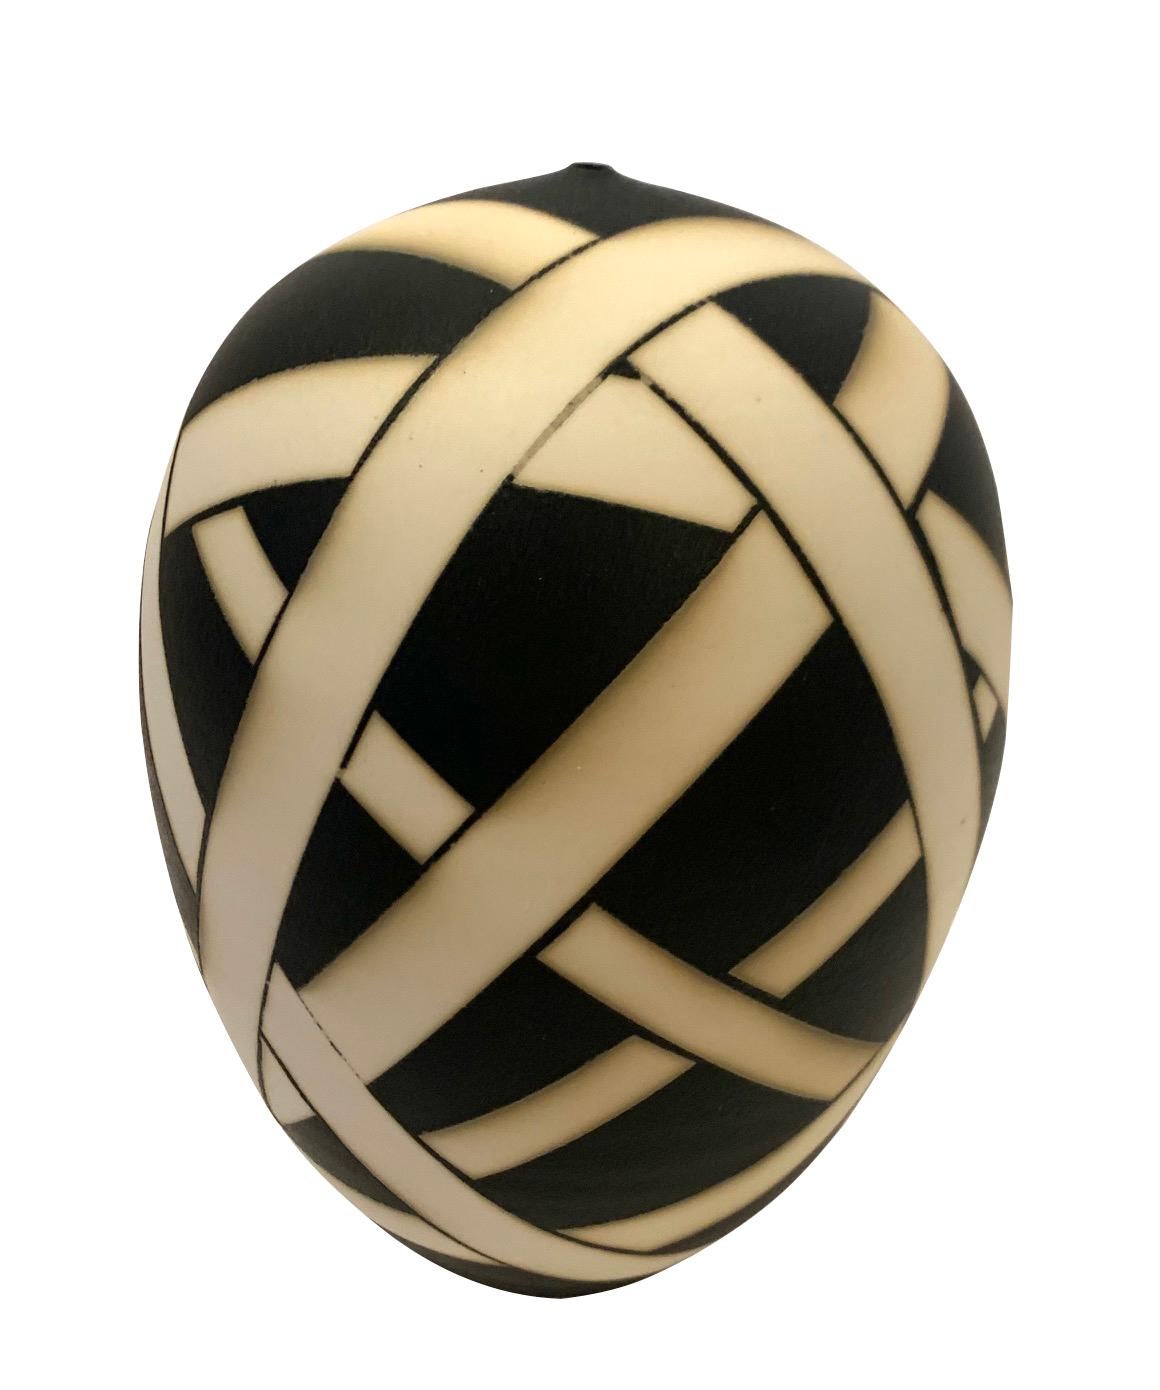 Contemporary made in the USA porcelain black and cream geometric stripe pattern design.
Black ground with white free form bands surrounding the vase.
Hand made one of a kind.